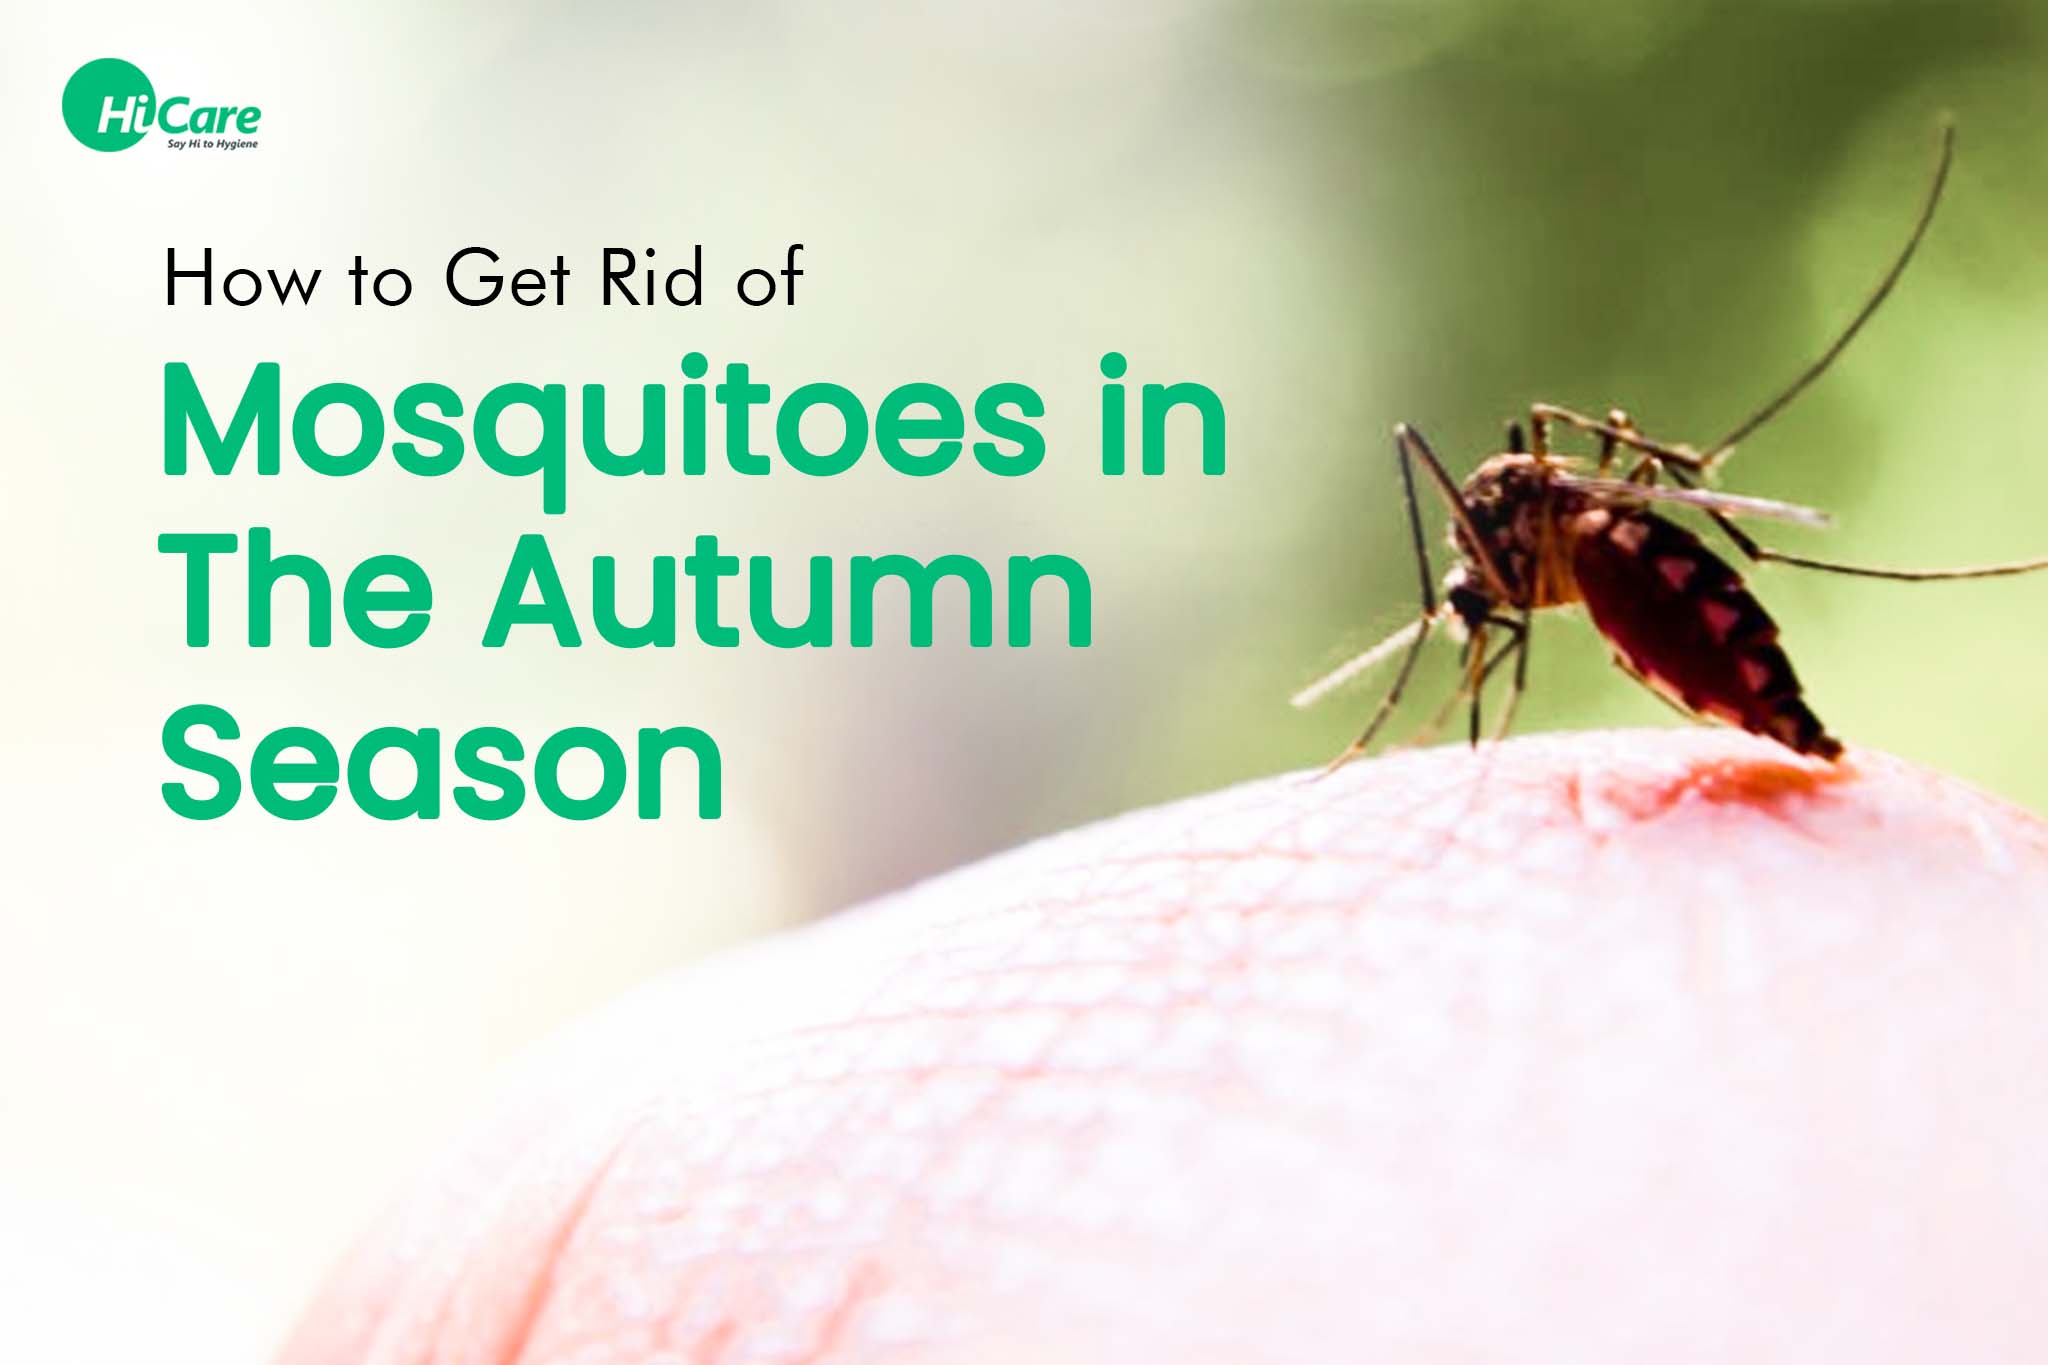 How to Get Rid of Mosquitoes in The Autumn Season?